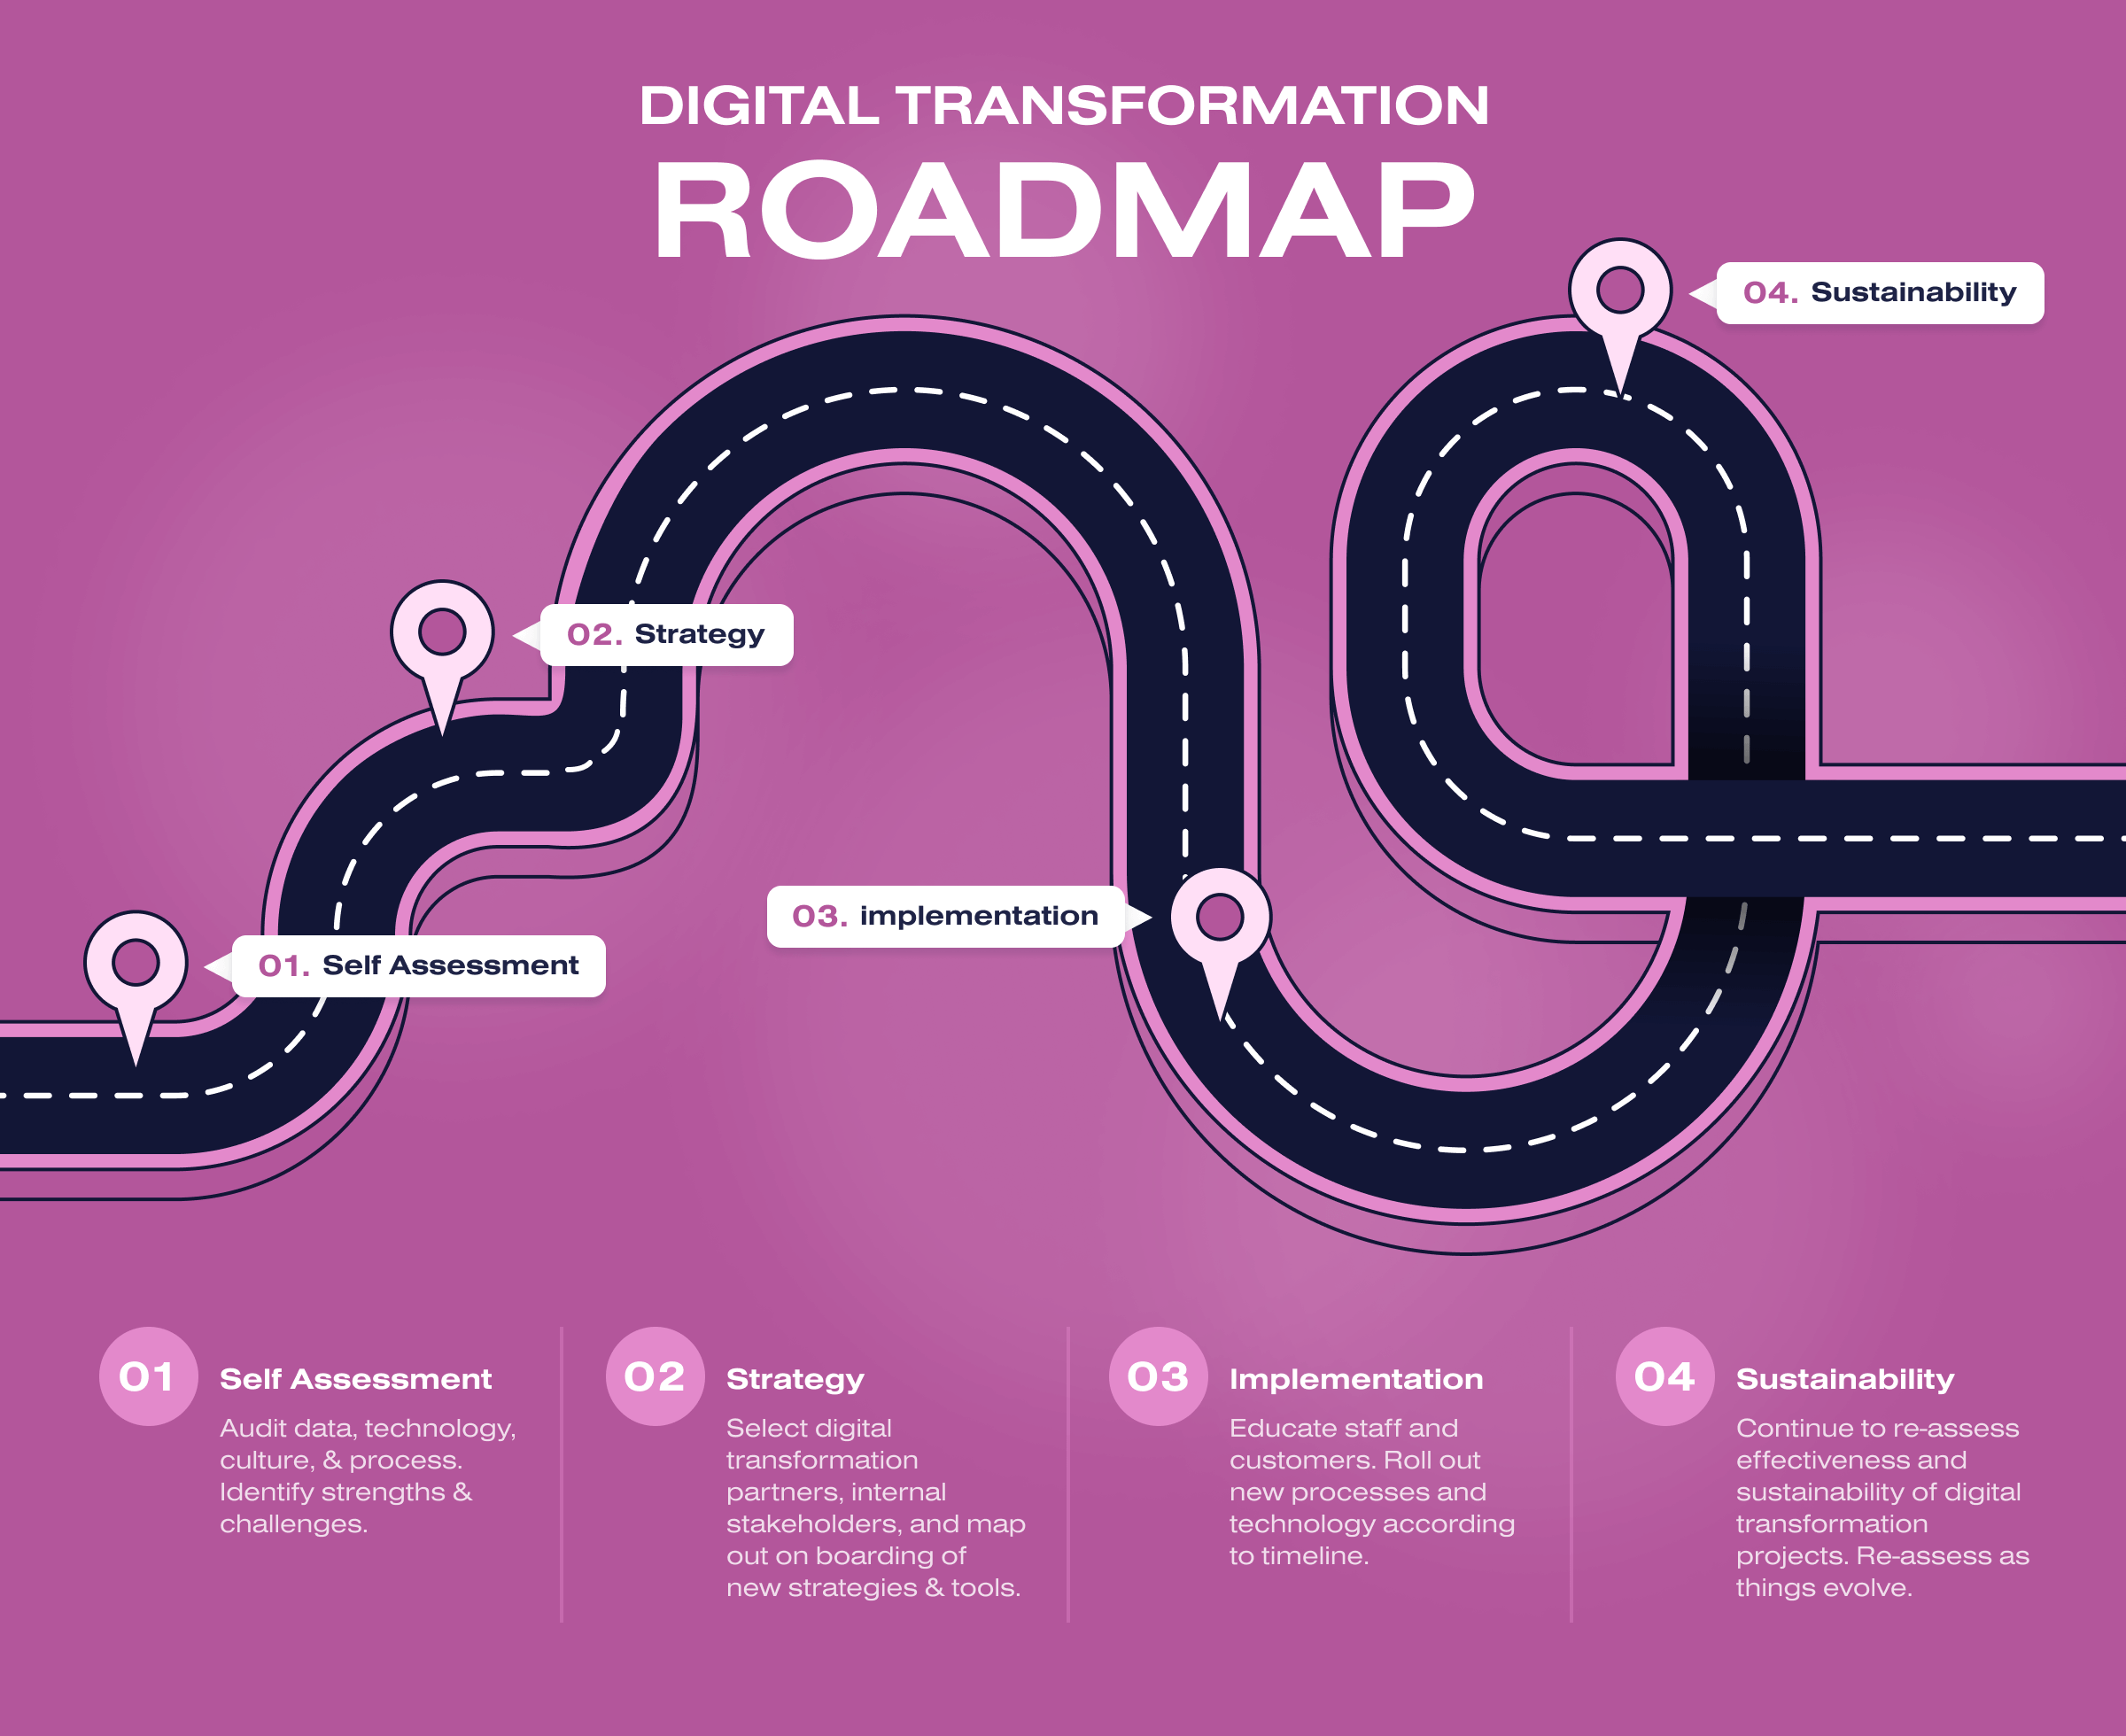 How to Build a Digital Transformation Roadmap